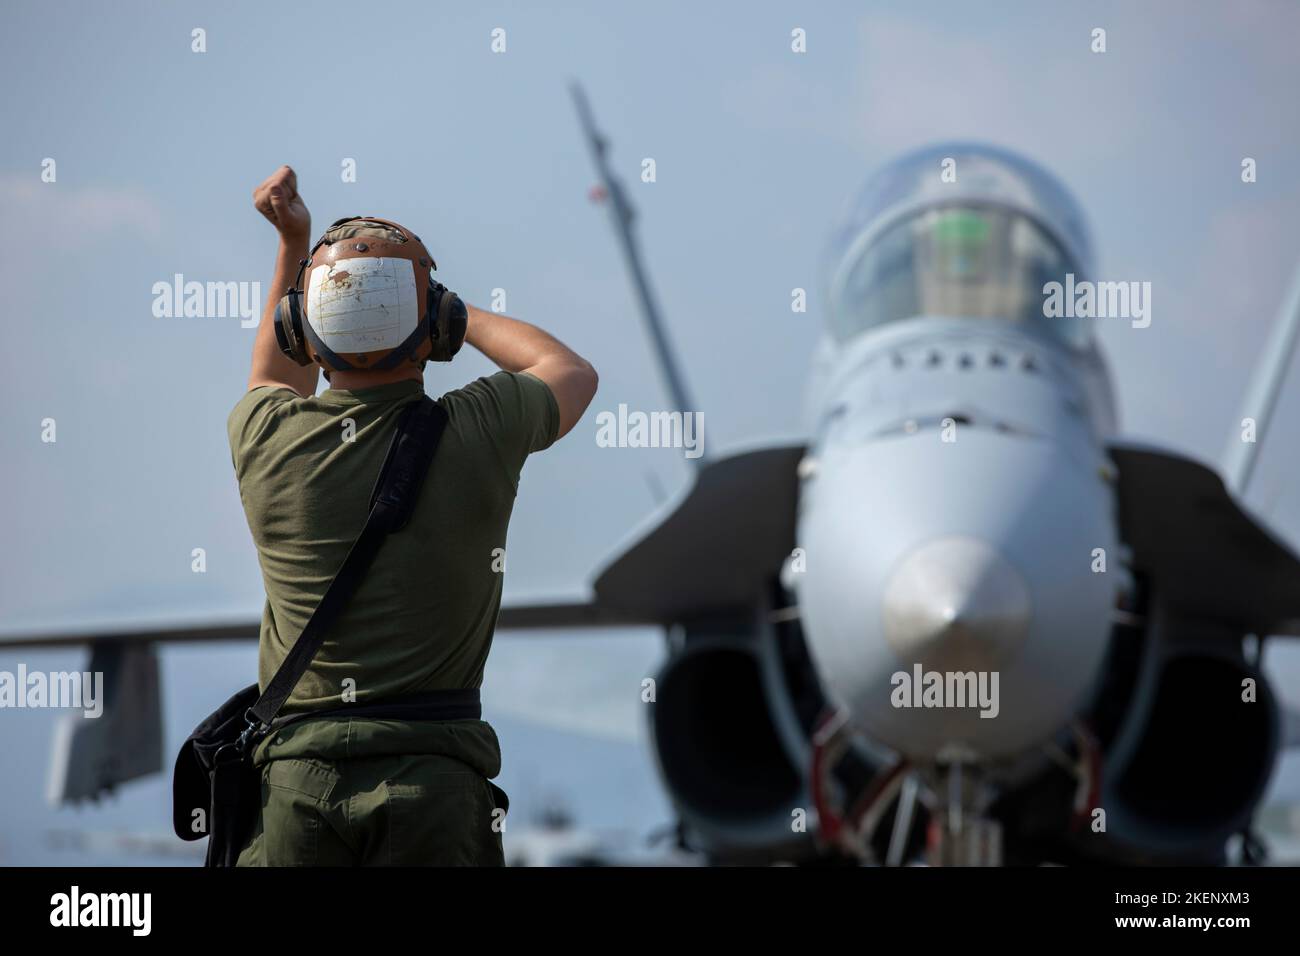 U.S. Marine Corps Lance Cpl. Richard Blake, a fixed-wing aircraft with Marine Fighter Attack Squadron (VMFA) 312, signals to an F/A-18D Hornet aircraft during pre-flight checks at Japan Air Self-Defense Force Nyutabaru Air Base, Japan, Nov. 9, 2022. Under the Unit Deployment Program with Marine Aircraft Group 12, VMFA-312  participates in the Aviation Training Relocation Program to improve operational readiness and interoperability with Japan Air Self-Defense Forces in the Indo-Pacific theater. (U.S. Marine Corps photo by Sgt. Jackson Ricker) Stock Photo